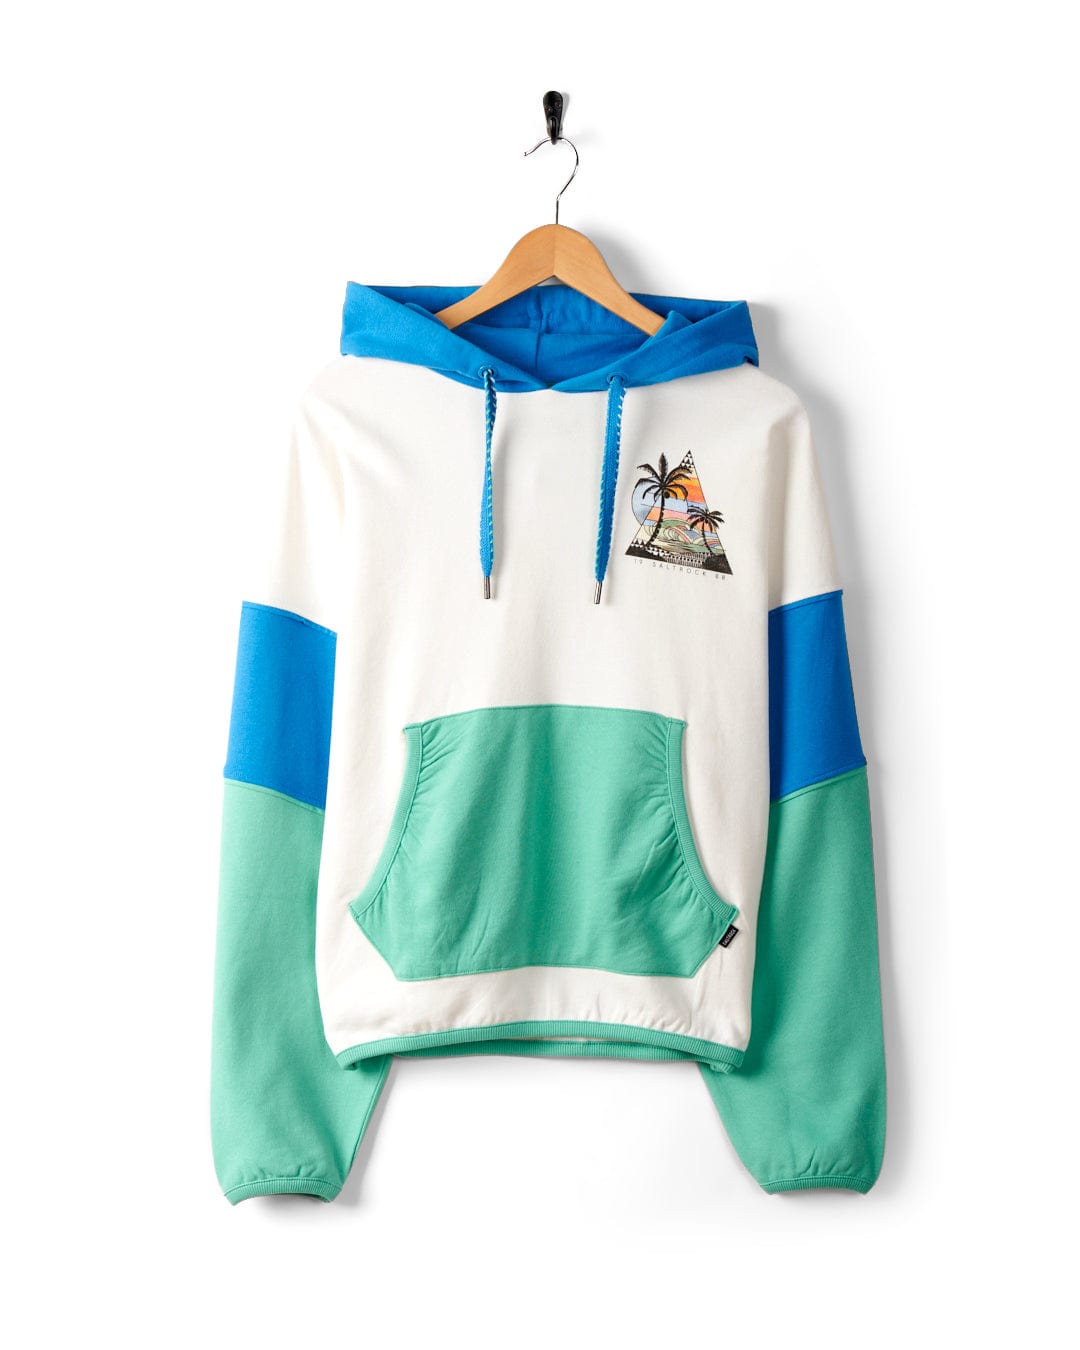 A hooded sweatshirt with white, blue, and green color blocks hangs on a wooden hanger. The Geo Beach - Womens Pop Hoodie - White, made of 100% cotton, features a front pocket and an embroidered palm tree and sunset design on the chest with subtle Saltrock branding.